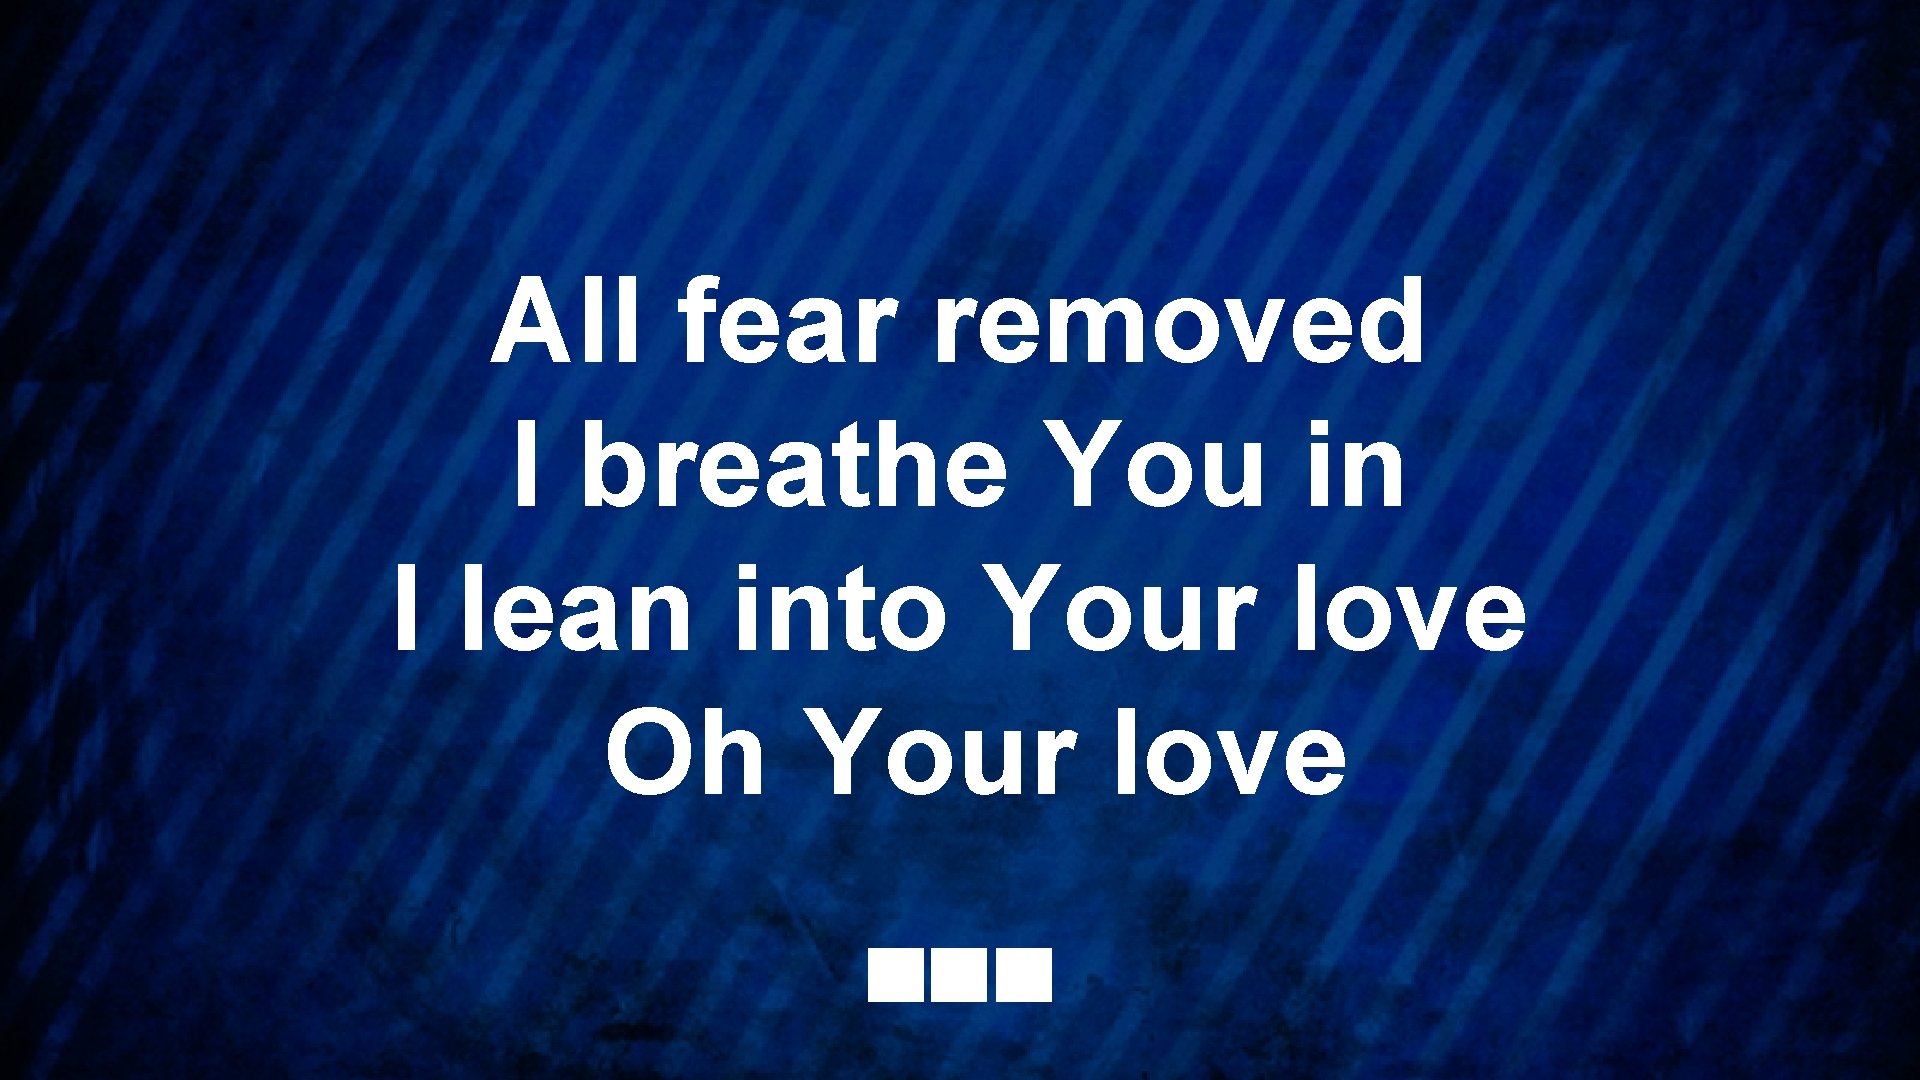 All fear removed I breathe You in I lean into Your love Oh Your